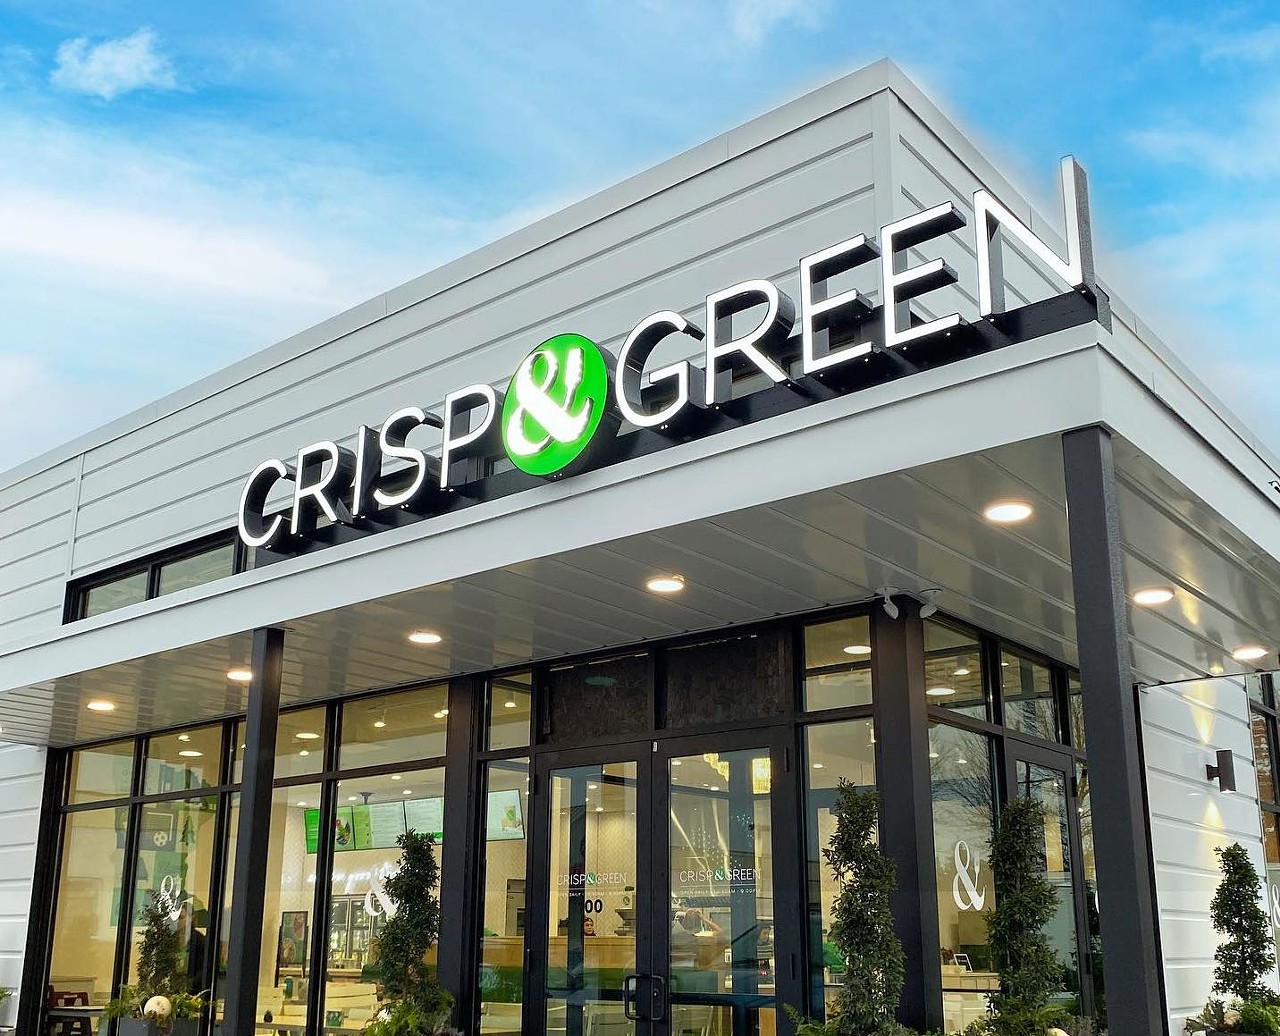 Crisp & Green  
Multiple locations
To accommodate its growing population of young urban professionals, Tampa Bay is a prime location for this fast-casual spot. This health-forward Minnesota-based chain is all about bowls. From salads to acai, Crisp & Green has something for everyone. According to their website, there are three locations expected to open up in the Tampa Bay Area.
Photo via Crisp & Green/Facebook